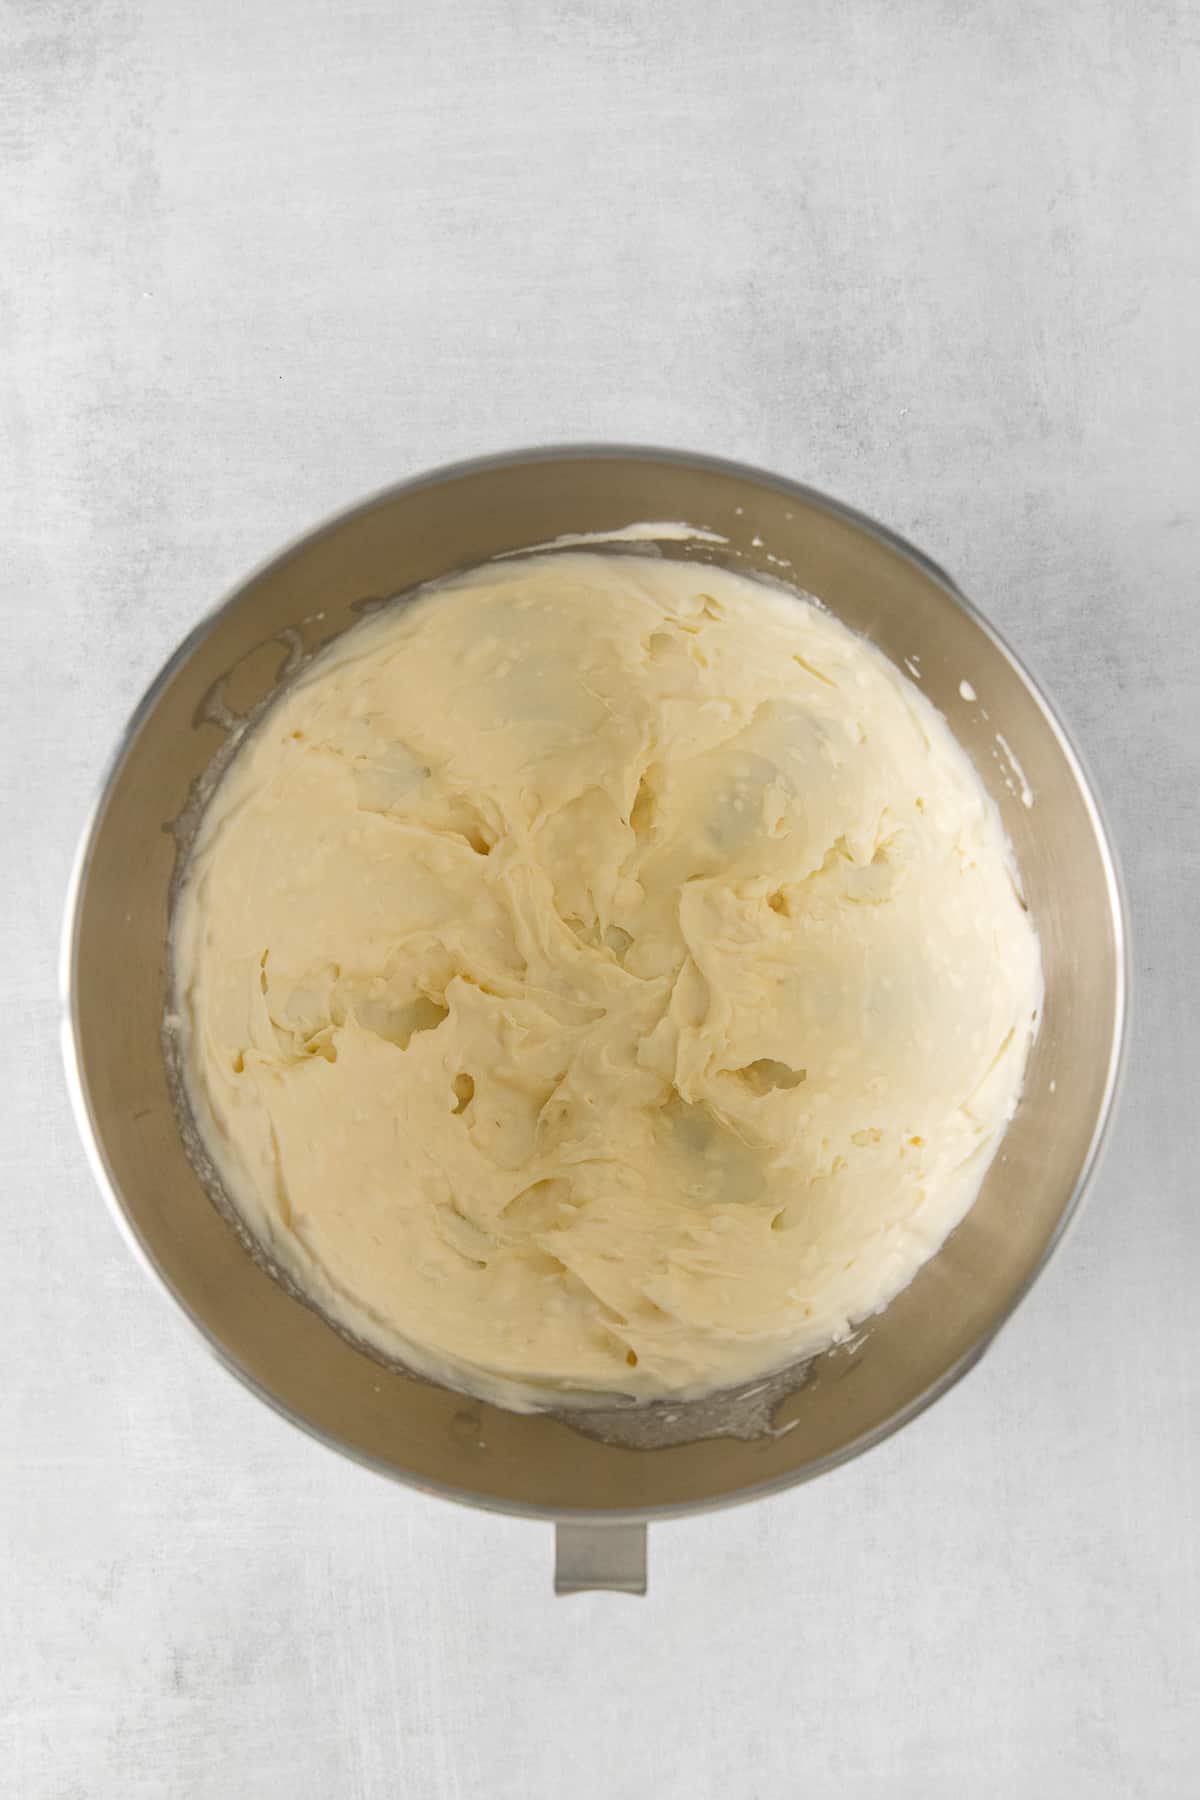 Mascarpone frosting in a mixing bowl.